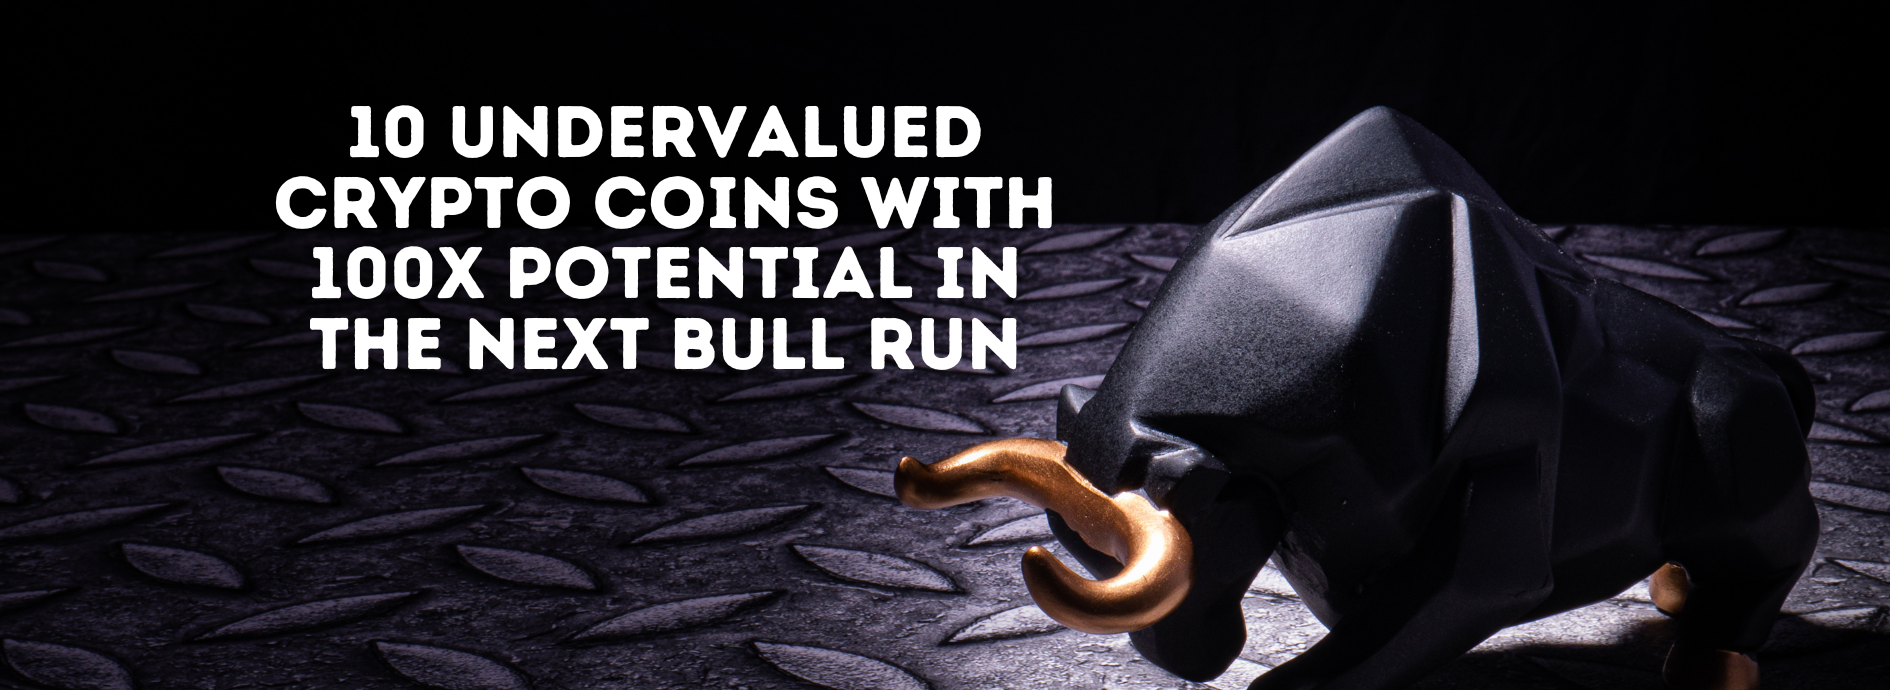 10 Undervalued Crypto Coins with 100X Potential in the Next Bull Run